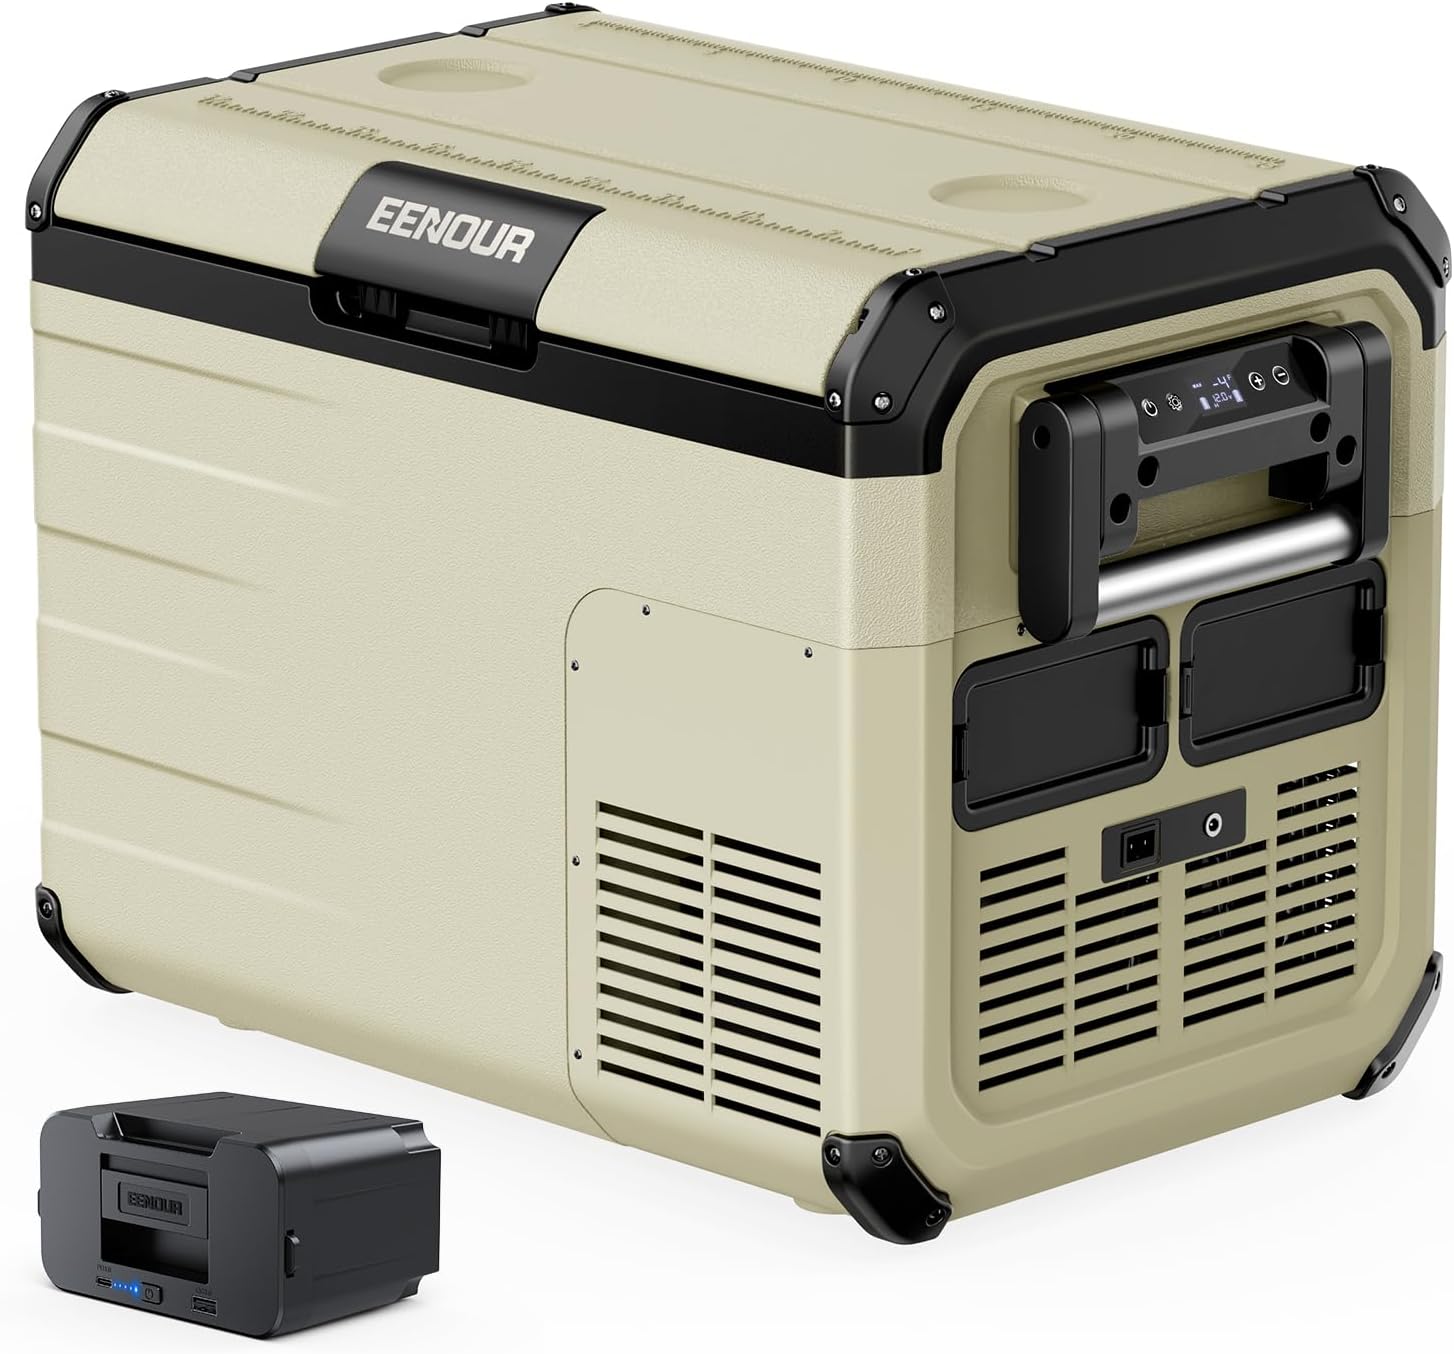 Eenour Portable Cooler With Solar Power